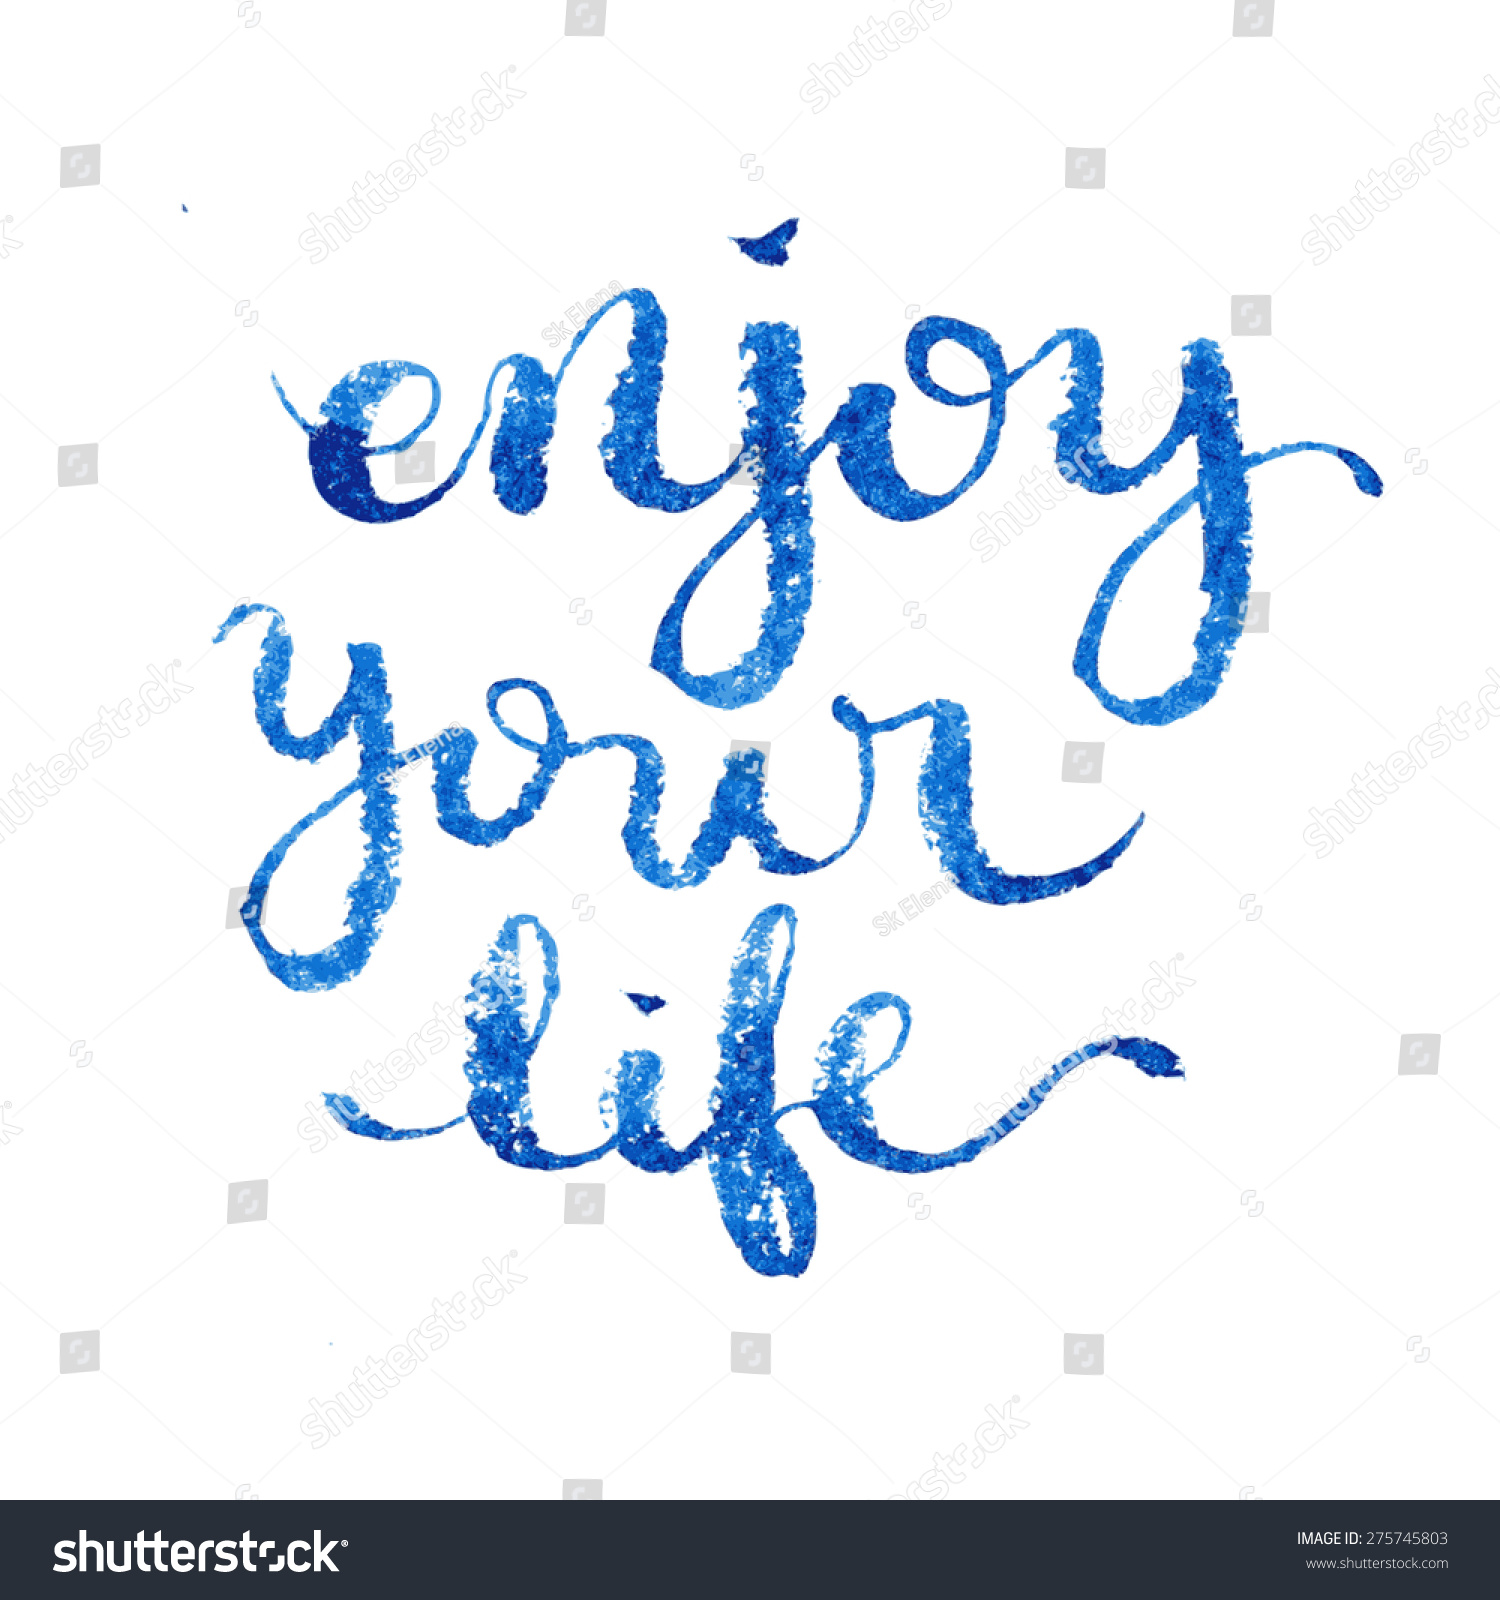 Enjoy your life quote typography vector illustration